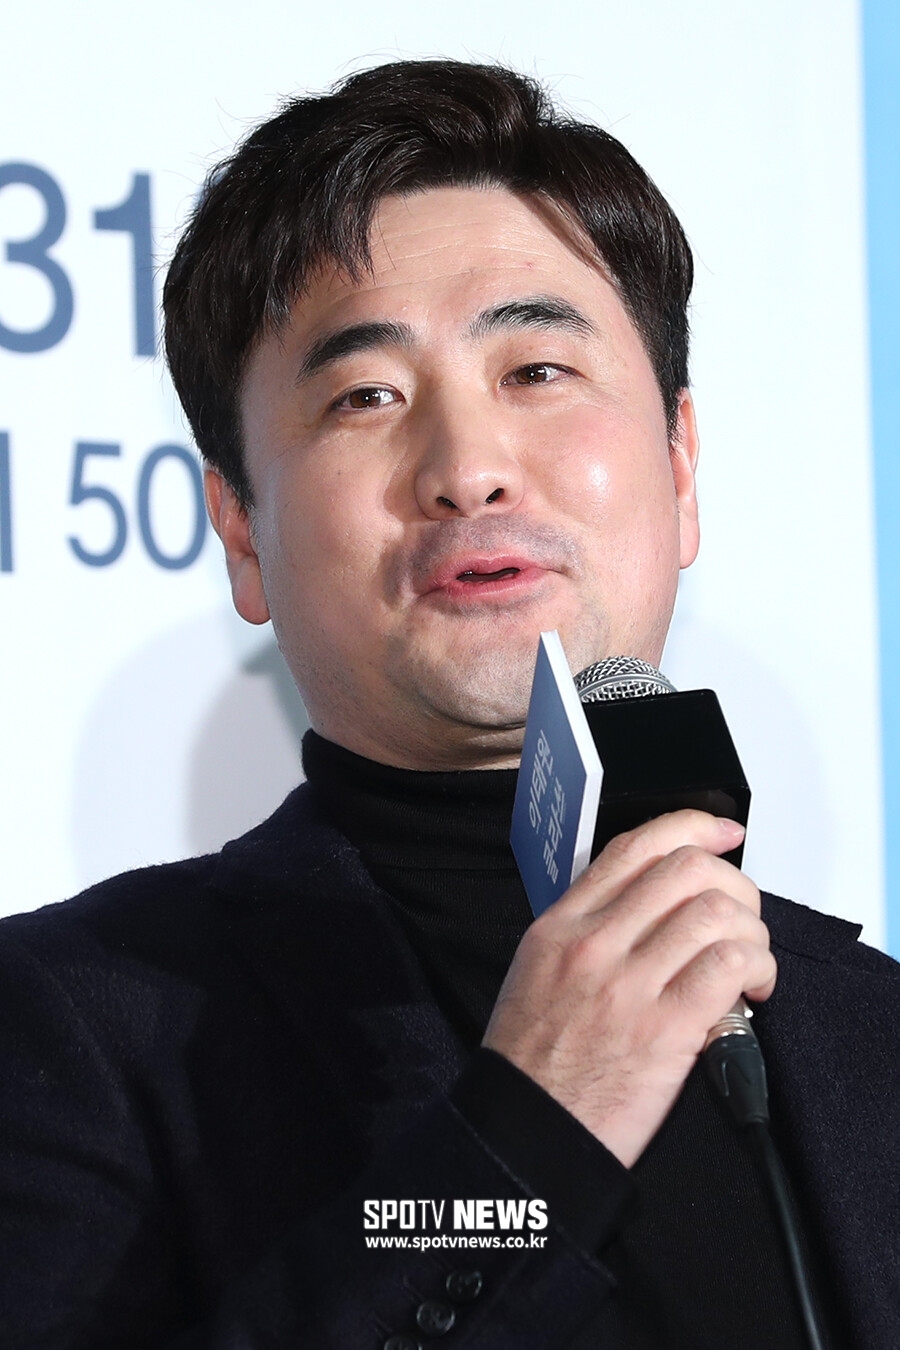 Itaewon Clath predicted the birth of an exciting drama that the writer of Web toon original work also shed tears.Park Seo-joon, Kim Da-mi, Yoo Jae-myung, Kwon Nara, Kim Seong-yoon PD, and Jo Kwang-jin will be making a new JTBC gilt drama Itaewon Clath (playplay by Jo Kwang-jin, directed by Kim Seong-yoon) at the Conrad Hotel in Yeouido, Seoul on the afternoon of the 30th. I attended the presentation and was confident of the perfection of the drama which is more fun than Web toon.Itaewon Clath is a work that depicts the hip rebellion of youths who are united in an unreasonable world, stubbornness and popularity.It draws the myth of the entrepreneurs who pursue freedom with their own values ​​on the small street of Itaewon, which seems to have compressed the world.Especially, based on the original work which is considered as Life Web toon of many readers, acting actors such as Park Seo-joon, Kim Da-mi, Yoo Jae-myung, and Kwon Nara are gathering together and expecting.In particular, Showbox, a movie distributor who has been performing well with the movie Namsans Directors (director Woo Min-ho) of Lee Byung-hun, Lee Sung-min, Lee Hee-joon and Kwak Do-won Main actor, attracts attention by making Top Model in the first drama production with Itaewon Clath.Kim Seong-yoon PD said, Actors are also wearing clothes from characters that are worthy of Top Model.The artist is also a top model as much as he writes as an original work, and I am trembling because it is the first work I do in JTBC. I think Showbox would not have been the top model with that feeling.I hope Showbox will be affected and able to do well because Namsans managers are doing well. Itaewon Clath is written by Jo Kwang-jin, who wrote an original work, and he writes the script directly.Web toon has been transferred to dramas in the meantime, but it is unusual for an original work writer to write a drama drama.Jo Kwang-jin writes about writing the script directly, Web toon was chased by the weekly deadline, so there was a lot of regret in the narrative.There was a character that was only consumed, but I was very careful to save such characters in detail.The director persuaded me a lot, but I was attracted to the fact that I could directly complement Web toons regrets.I had a lot of things I had never done before, he said. In fact, when I started working on the script, I thought it was easy.Fortunately, I met the coach so well that I think it is the master. I trust the coach and there is no burden.I think there are some strengths as it is a script written by an original worker. Cho expressed high satisfaction with the synchro rate of actors who brought out characters from Web toon in drama. I am 120% satisfied with the synchro rate.I often wonder what god I wrote and what I saw in the video, and when I wrote, I thought I knew the characters best, but Actors interpreted and implemented them more intensely than I did.I cried as I watched the actors performance, not the god to weep. The synchro rate is high enough to say 120%. Im really satisfied.I can not say one, but I think Park Seo-joons synchro rate is the best. Park Seo-joon, who has succeeded in each of the films starring in the drama Ssam, My Way, Why is Kim Secretary, and She Was Pretty, leads the story as a main character.In the play, Park Seo-joon was unfairly an ex-convict of attempted murder, but he played the role of a Park who dreamed of success by setting up a night Foa in Itaewon with seven years of money.Park Seo-joon said, It is a famous original work, so it does not get out of the original work much. It seems that the drama will be broadcast with a funny story added.I was so drawn to the drama that I thought I wanted to express this character. I tried a lot to express it delicately, and I took a lot of effort.I do not think you can get to Web toon first, but even if you watch the drama, you can enjoy it without difficulty. Park Seo-joon, who plays Top Model in the second Web toon original work drama, said, Original work is so popular that there are many fans and virtual casting.Of course, it could be a casting I didnt expect from our original work fans, but I can be confident that I can show you more than I expected.You can see what charms are added when 2D becomes a video. Kim Da-mi played Joe-yol Lee, who met Park and became manager of Foa at night while on an elite course.Kim Da-mi, who has become a stardom as an actor representing Chungmuro ​​with the movie witch, will go on his first home top model with Itaewon Klath.Kim Da-mi said: As soon as I saw it with Web toon, I read it all in three hours - that was just as fun and interesting.I felt like I did not see the character called Joe-yool Lee, so I thought it would be fun to act.Of course, I thought it would be difficult, but I was the top model because the director suggested that I could make my own Seo-yool Lee Yoo Jae-myung plays Jang Dae-hee, an authority in the food industry, who has achieved the current market in the Jongno Guldari stall.Yoo Jae-myung said, This is Web toon, which I paid for for the first time. I enjoyed it so much.I have a reason, a conviction, and I have tried a lot to express my life history with his own bending. I think I am not.Ive heard a lot about being young, in fact. To my personal life, it was Top Model.I tried to express the characteristics of the natural and original work, not just imitating it while making special makeup. Itaewon Klath will be broadcast at 10:50 pm on the 31st.